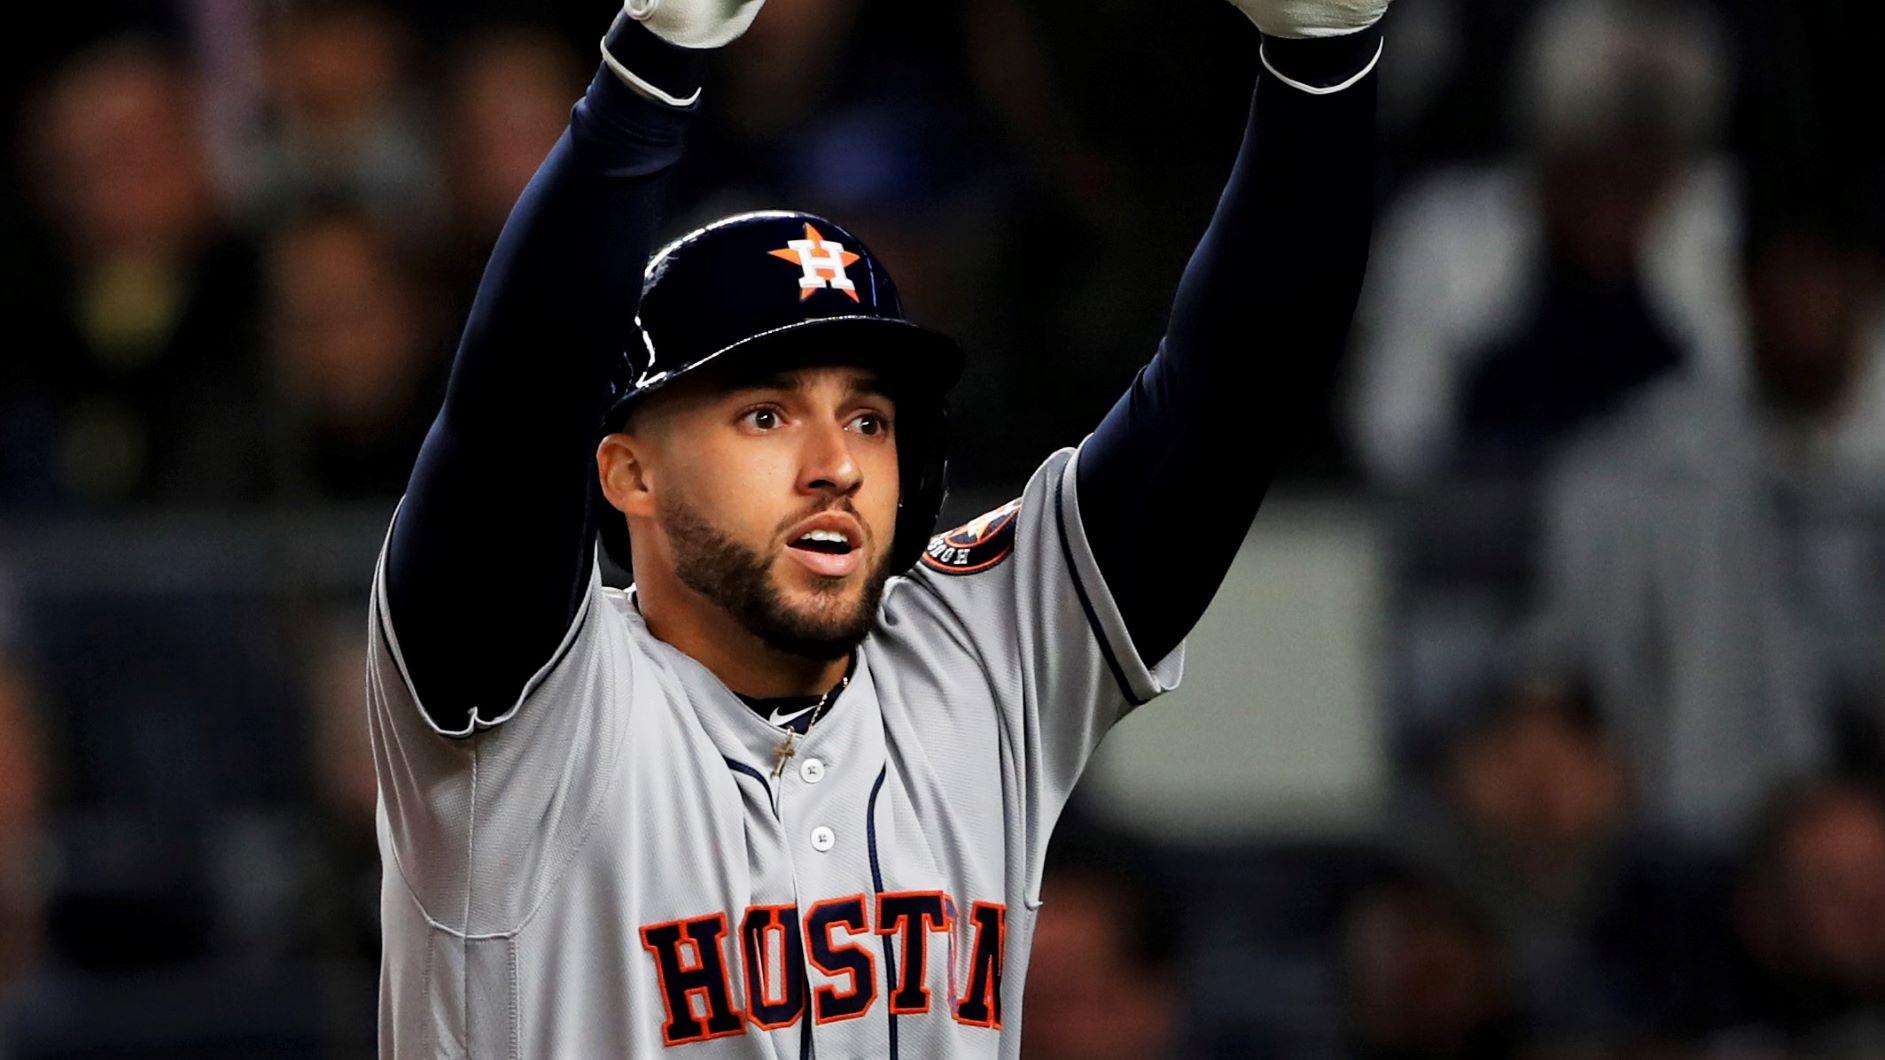 Oct 17, 2019; Bronx, NY, USA; Houston Astros center fielder George Springer (4) reacts after hitting a three run home run against the New York Yankees during the third inning of game four of the 2019 ALCS playoff baseball series at Yankee Stadium. Mandatory Credit: Noah K. Murray-USA TODAY Sports / © Noah K. Murray-USA TODAY Sports